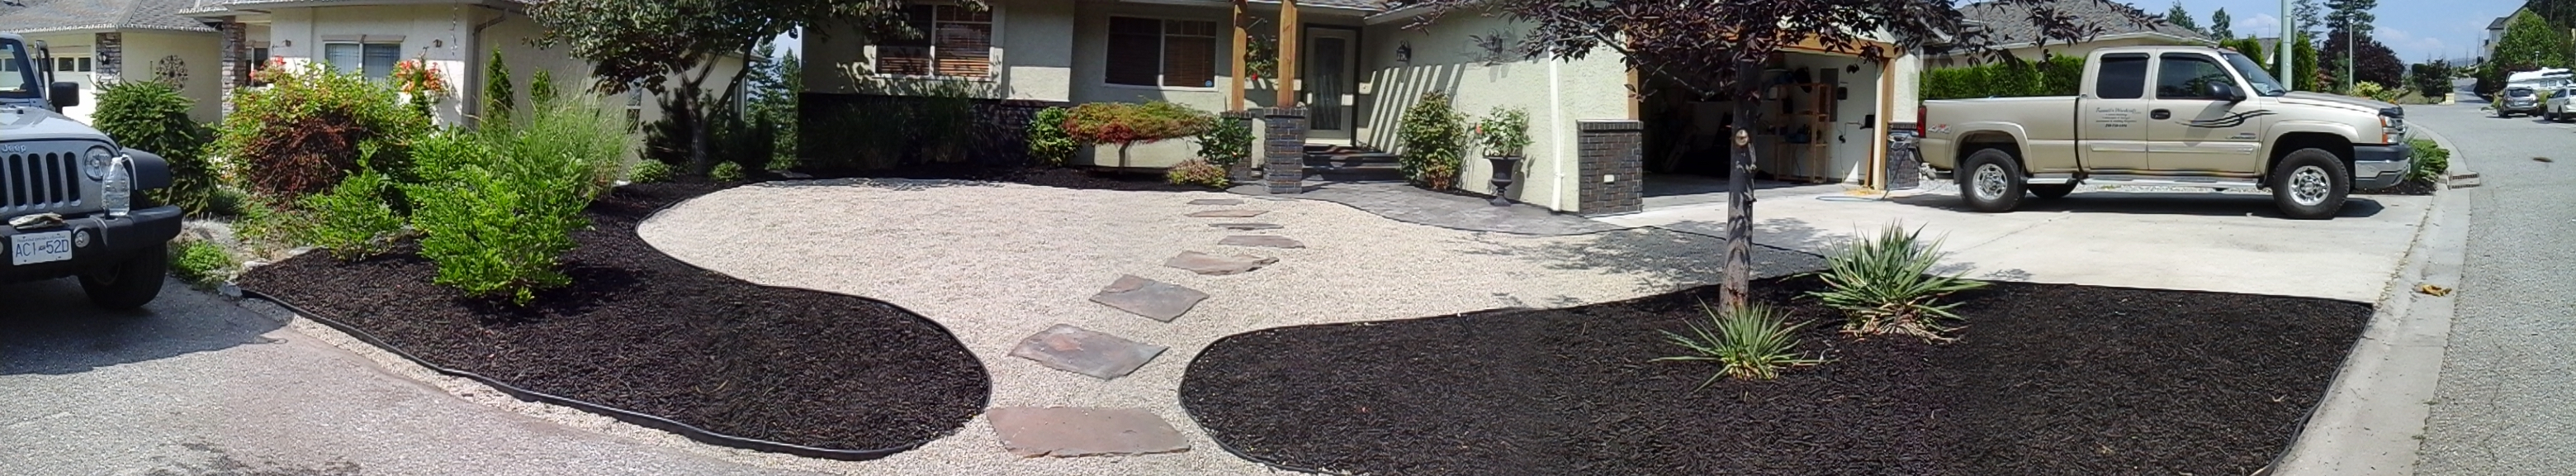 front yard newly landscaped with bark mulch, trees and shrubs